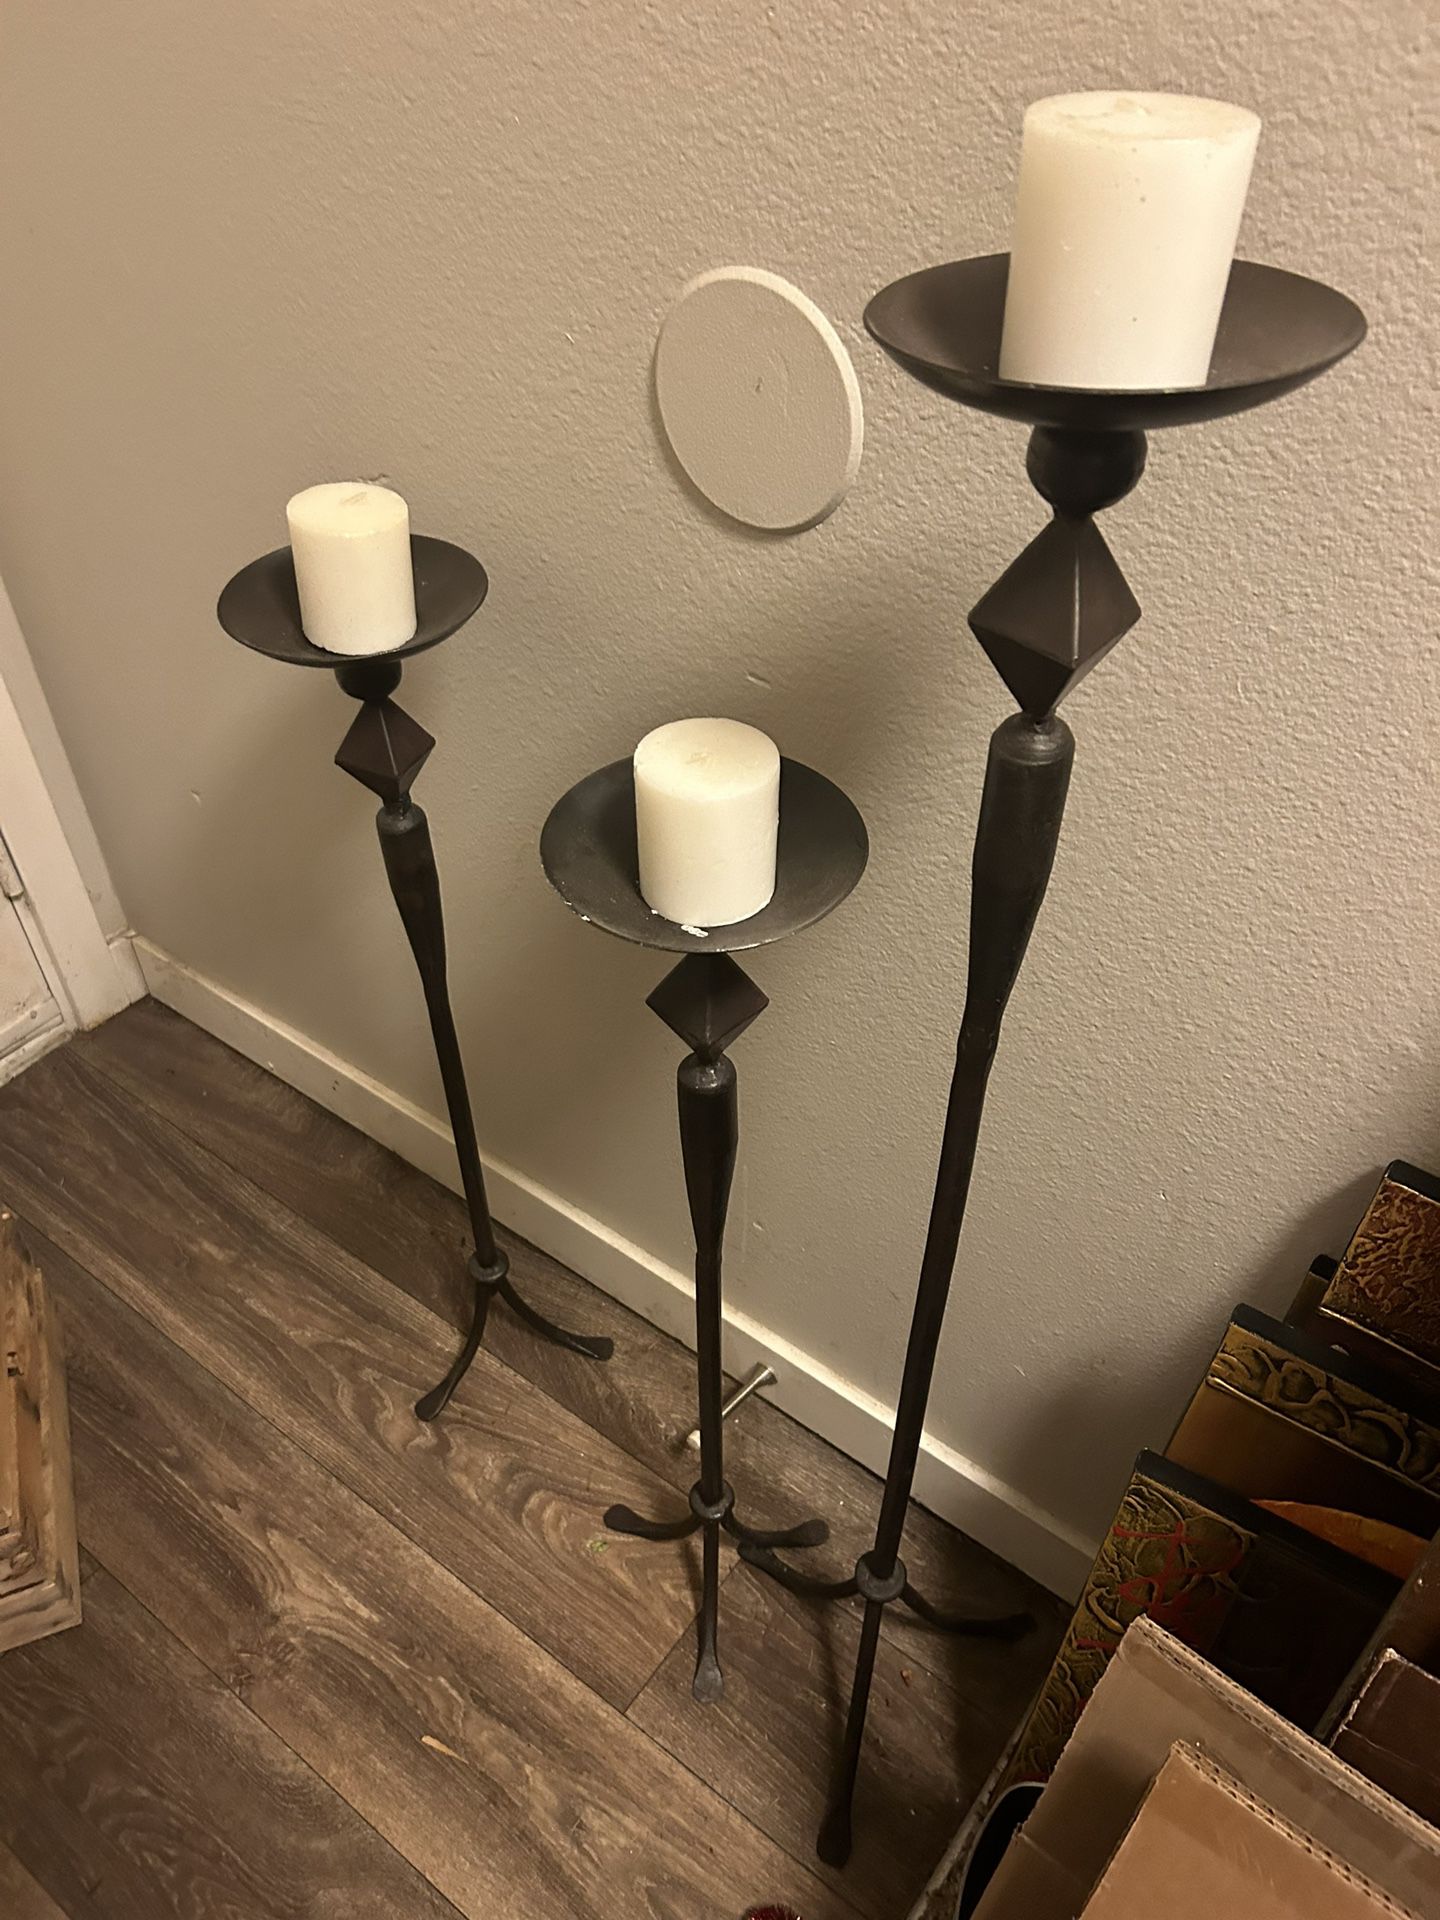 40” And 2-30” Wrought Iron Candle Holders